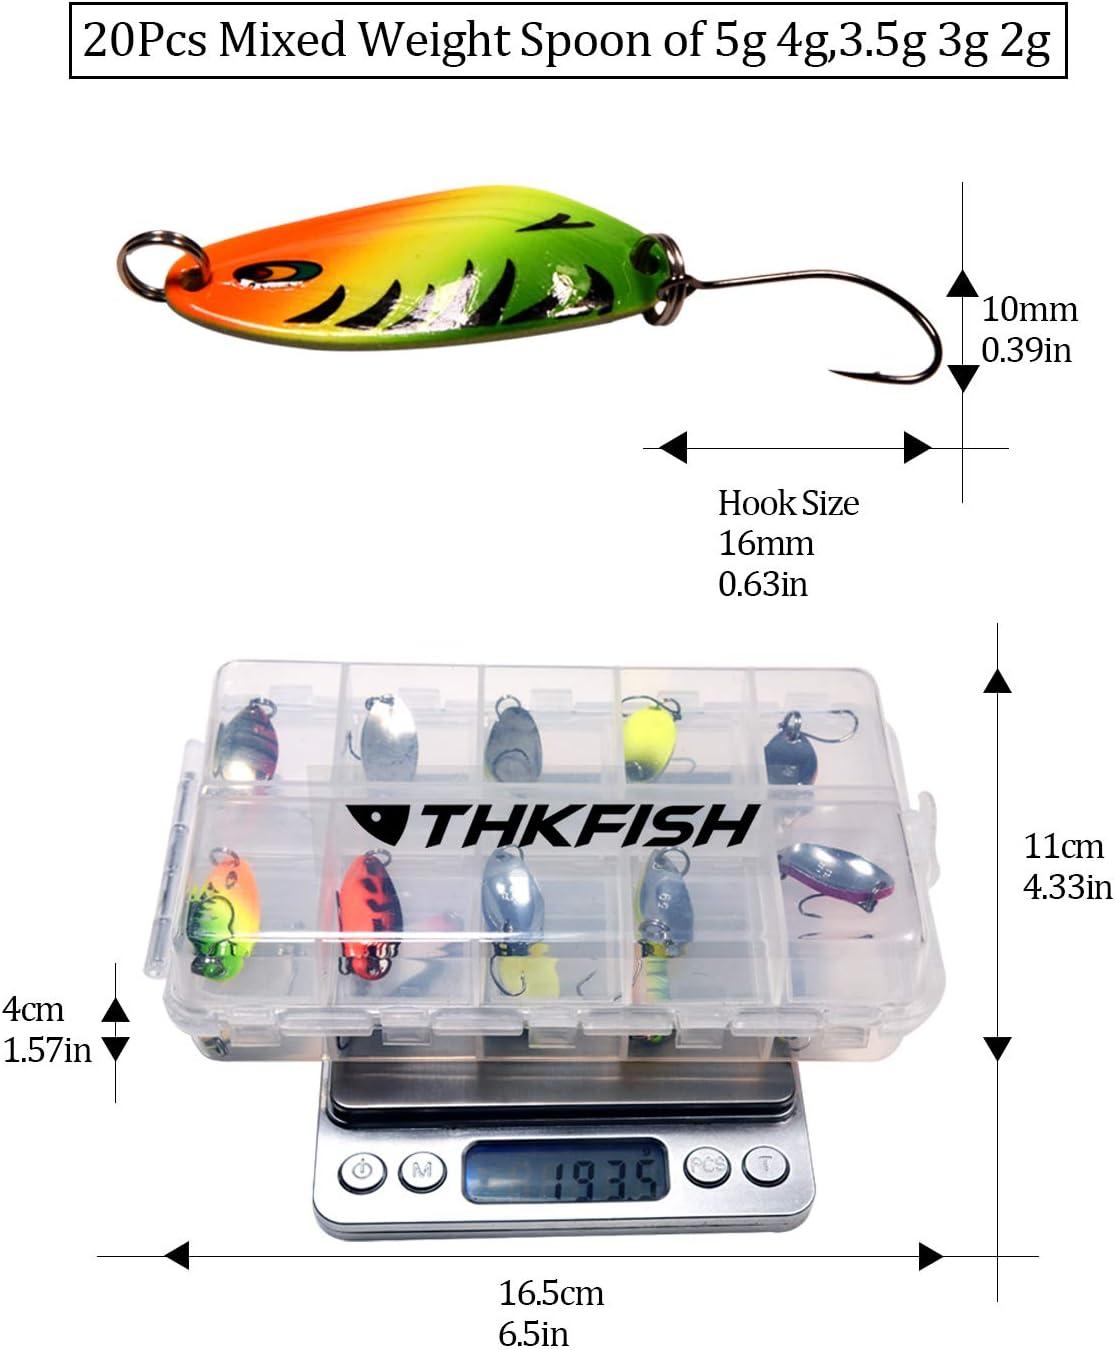 25-Piece Metal Spoon Fishing Lure Set Multicolor 3g, Outdoor Sports Acces, Outdoor Sports, Sports Equipment, Household, All Brands